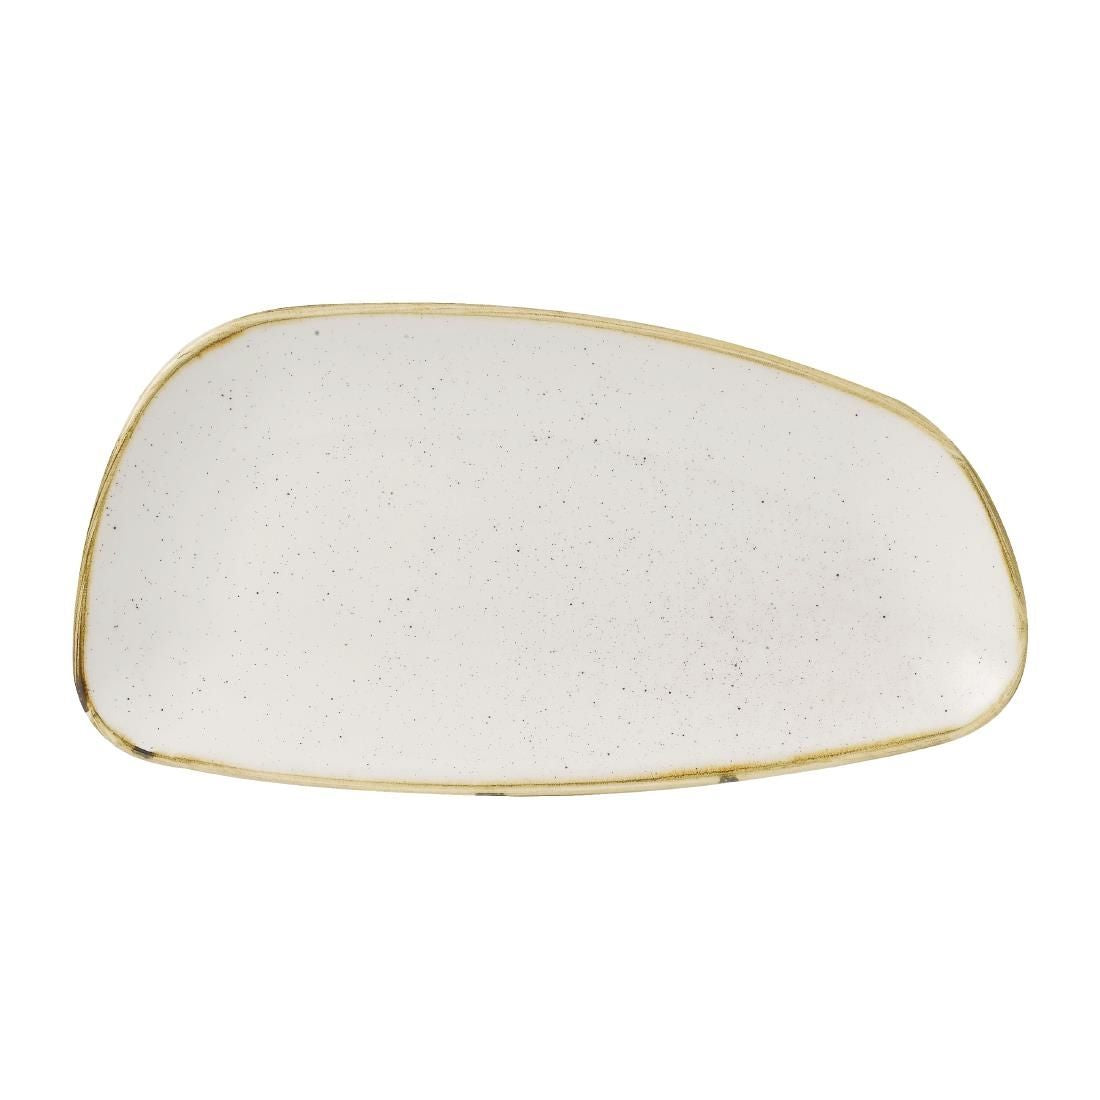 FD841 Churchill Stonecast Oval Plates Barley White 300x146mm (Pack of 12) JD Catering Equipment Solutions Ltd